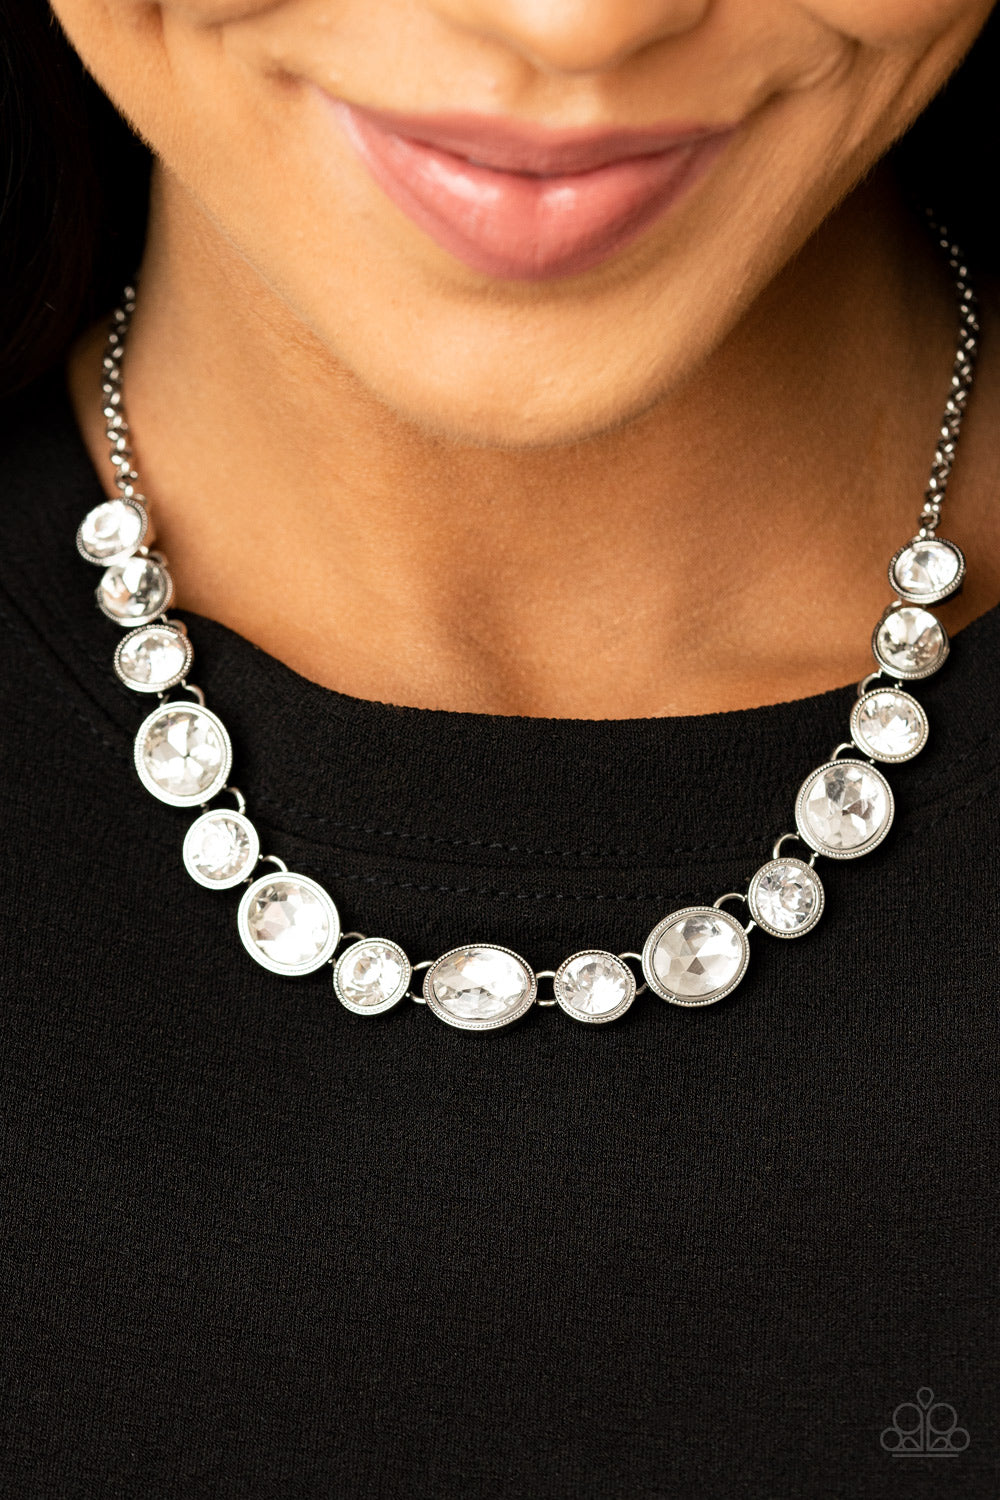 Girls Gotta Glow- White and Silver Necklace- Paparazzi Accessories